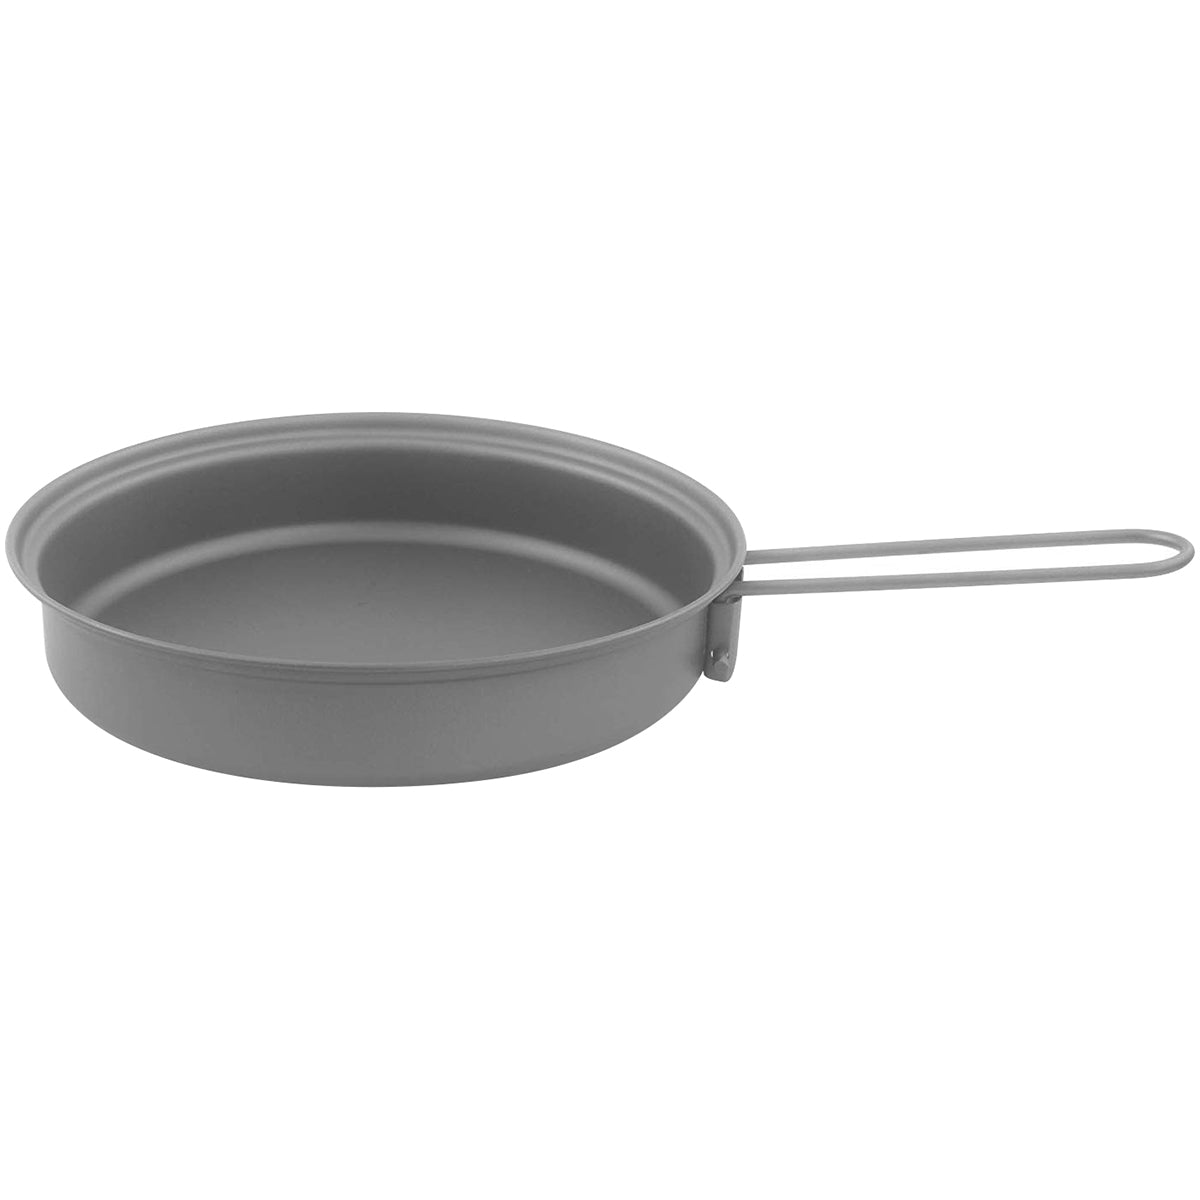 TOAKS Titanium Frying Pan with Foldable Handle - 115mm TOAKS